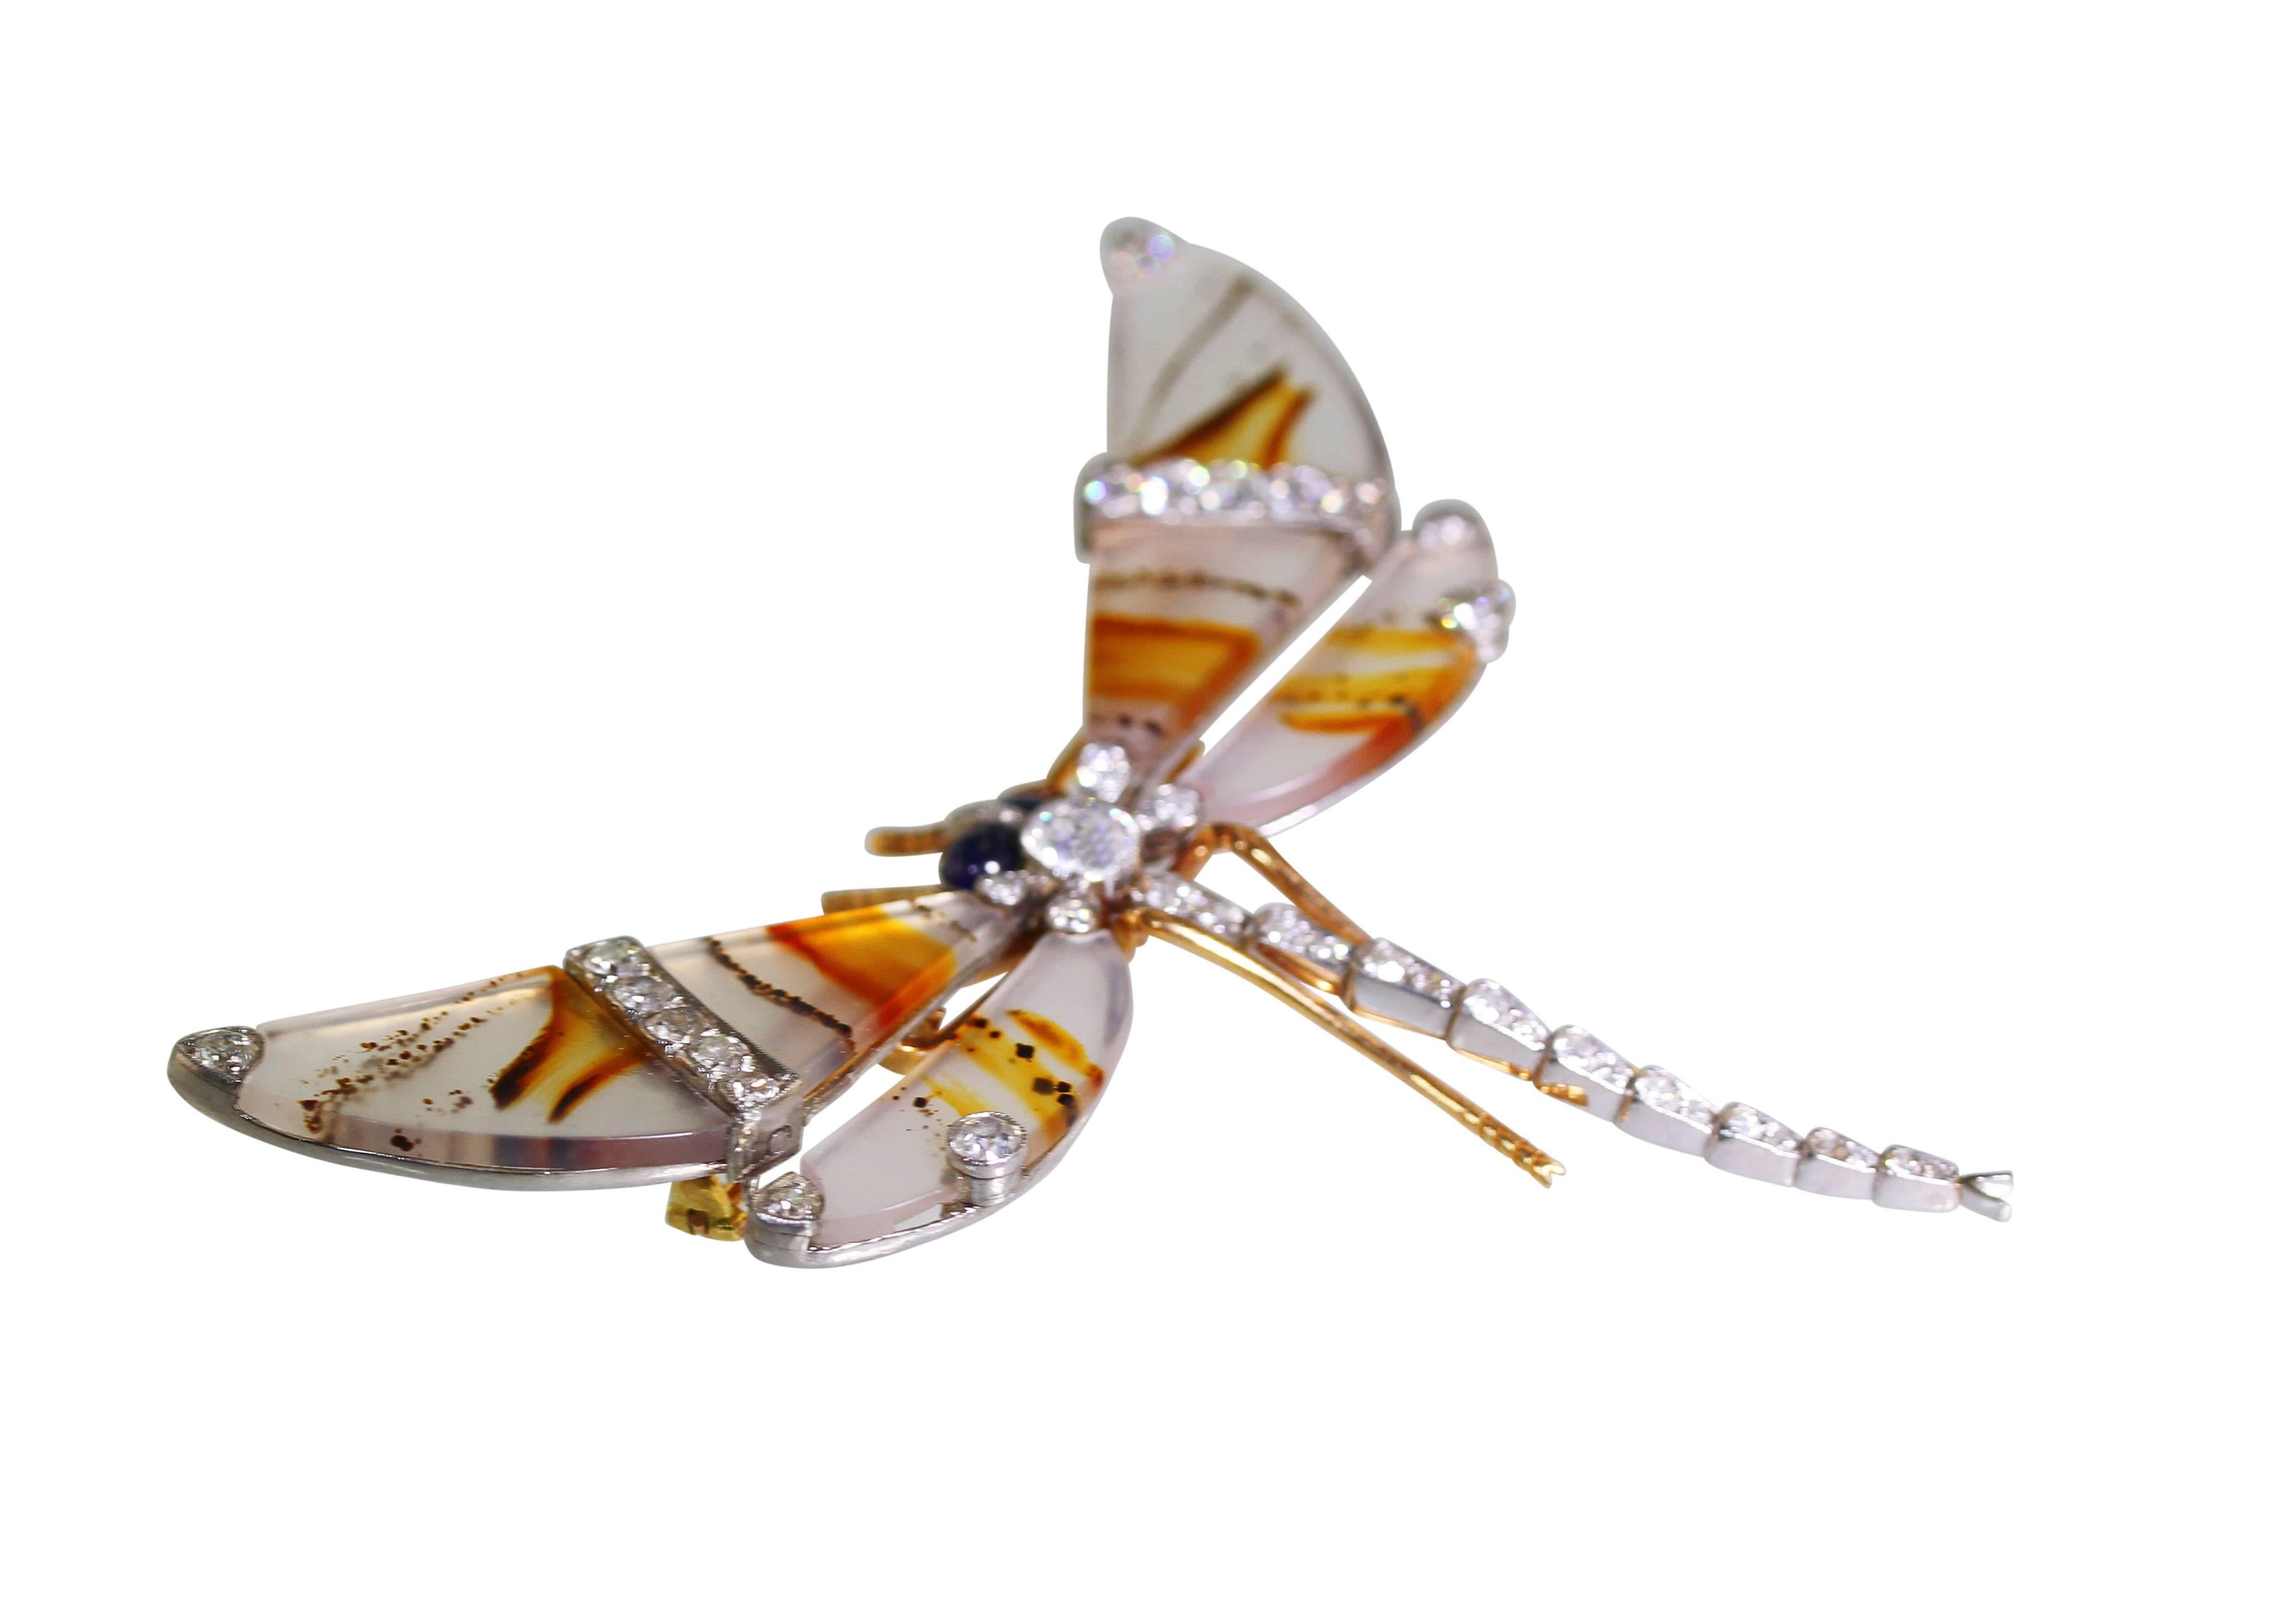 An Edwardian platinum, 18 karat gold, diamond, sapphire and agate brooch, designed as a dragonfly with all four wings made of natural agate design, accented by 45 round diamonds weighing approximately 2.25 carats, further accented by 2 cabochon